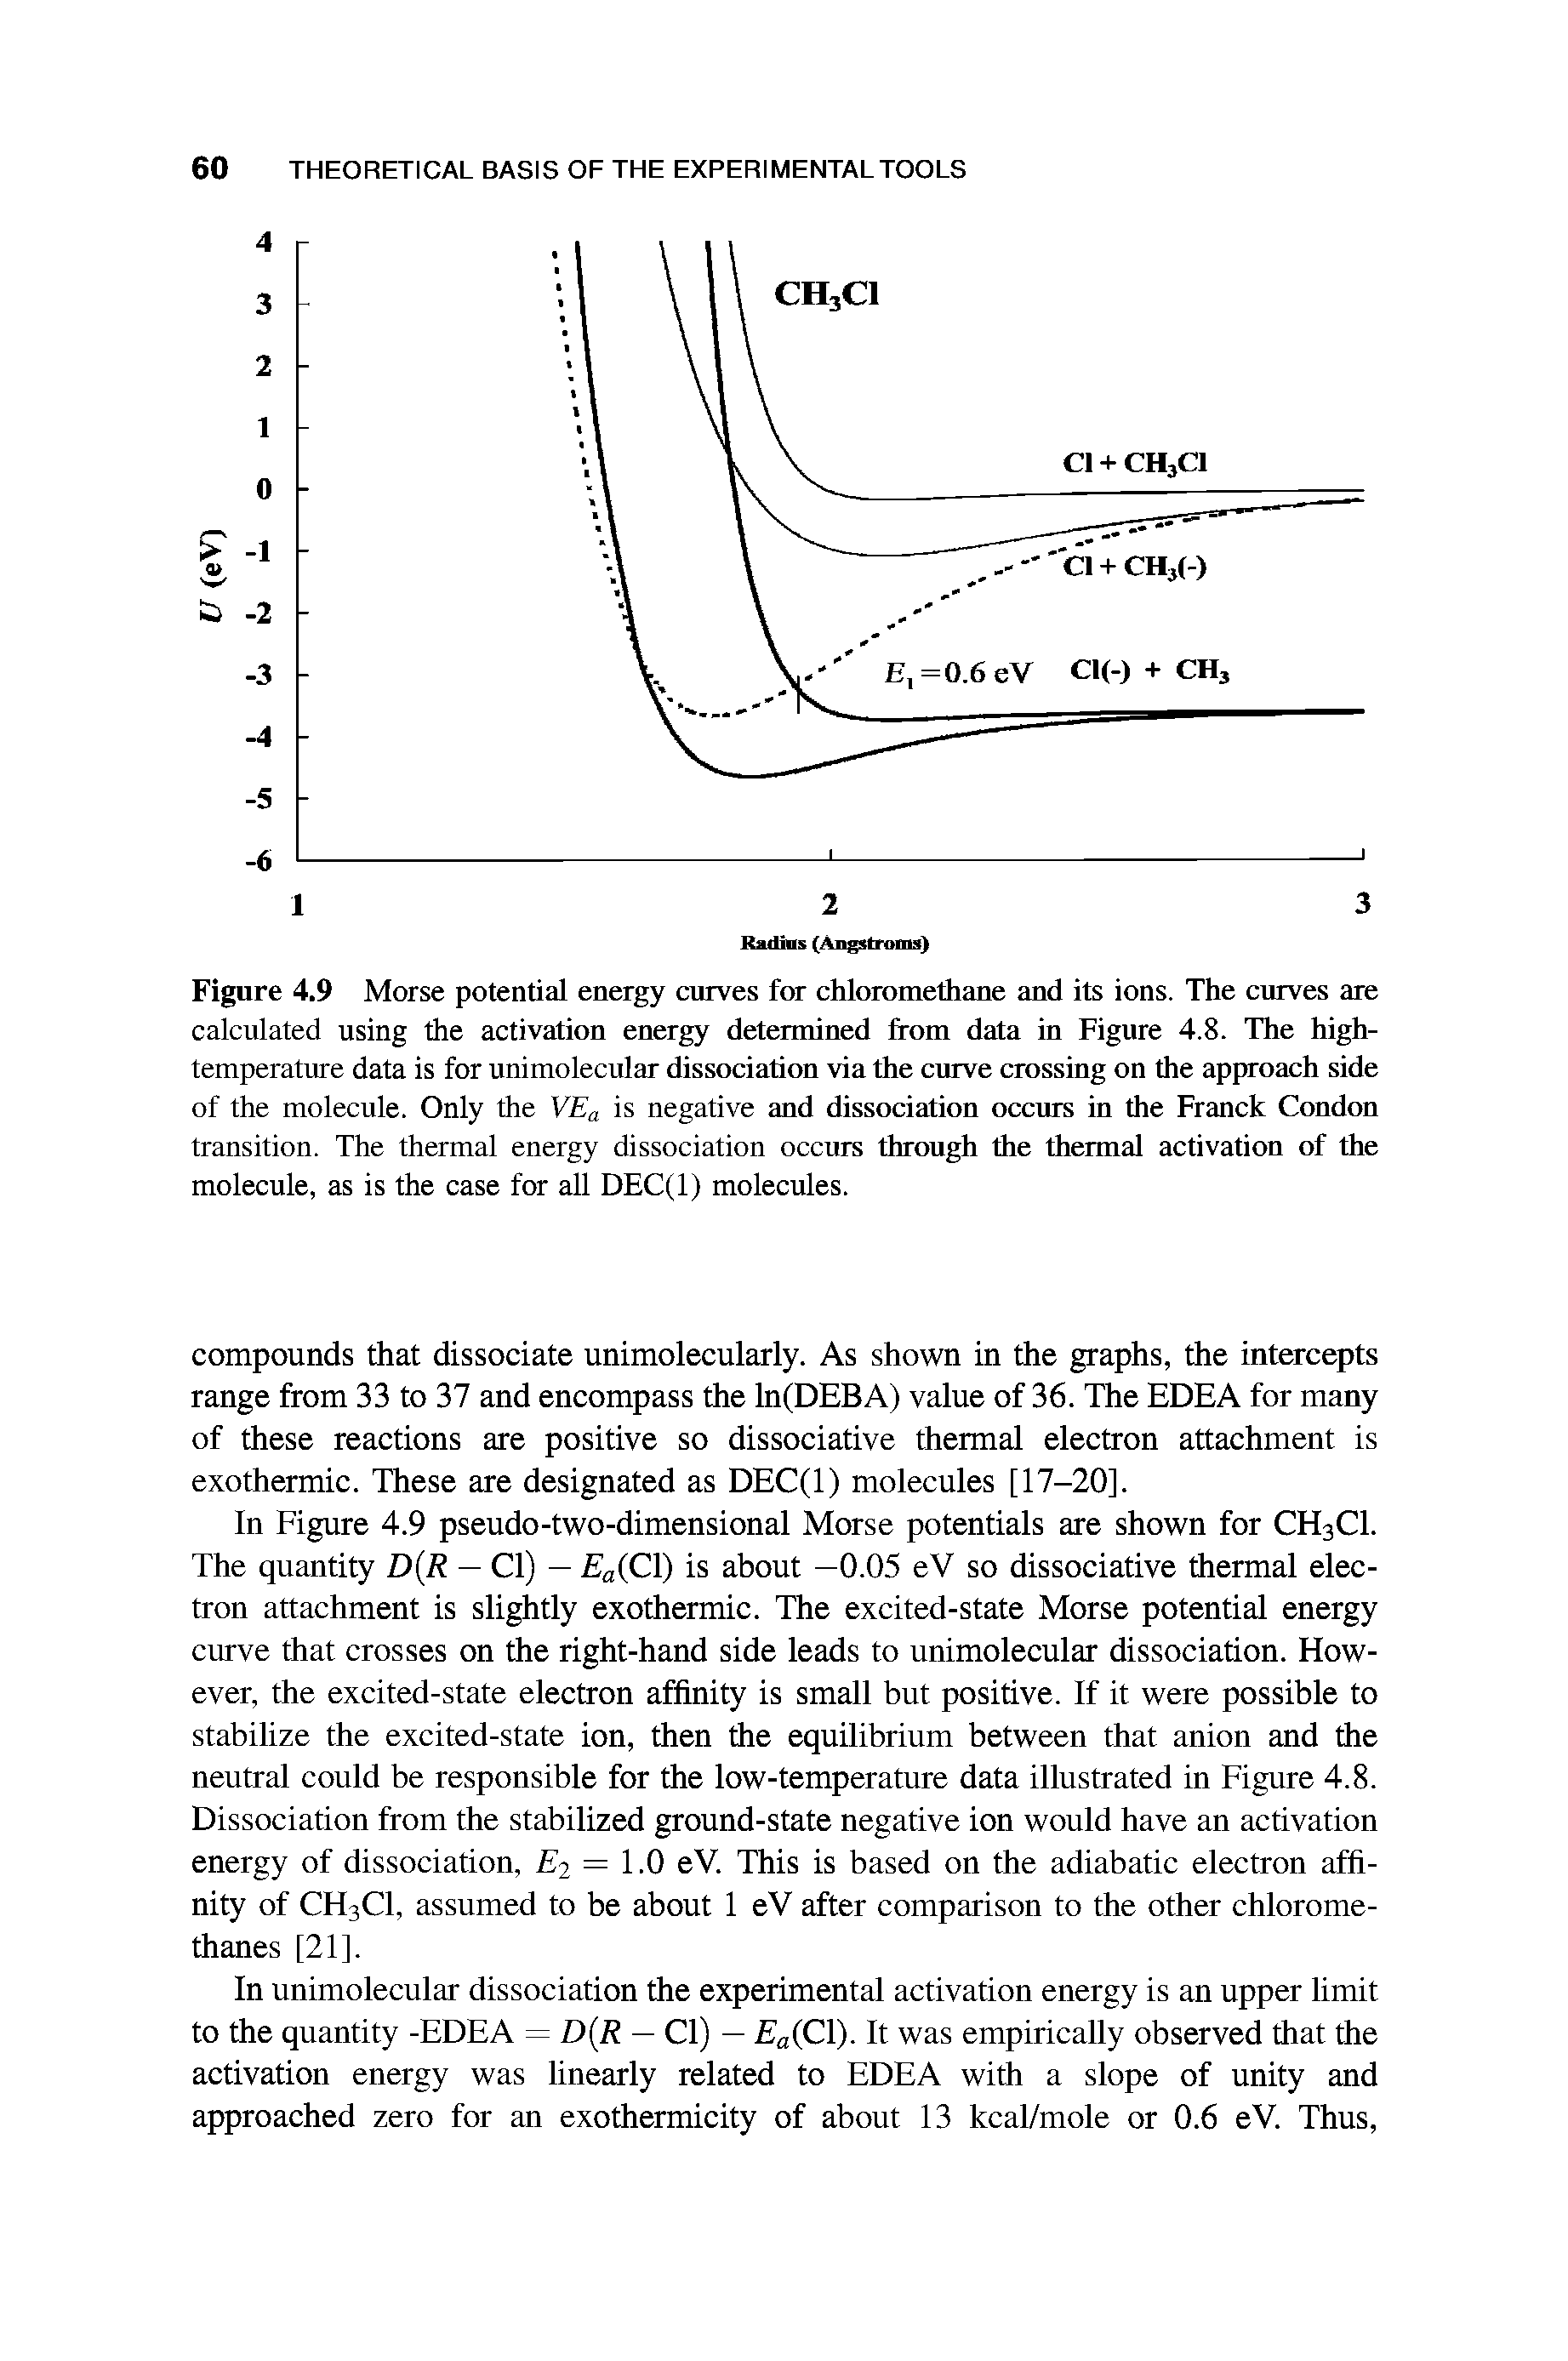 Figure 4.9 Morse potential energy curves for chloromethane and its ions. The curves are calculated using the activation energy determined from data in Figure 4.8. The high-temperature data is for unimolecular dissociation via the curve crossing on the approach side of the molecule. Only the VEa is negative and dissociation occurs in the Franck Condon transition. The thermal energy dissociation occurs through the thermal activation of the molecule, as is the case for all DEC(l) molecules.